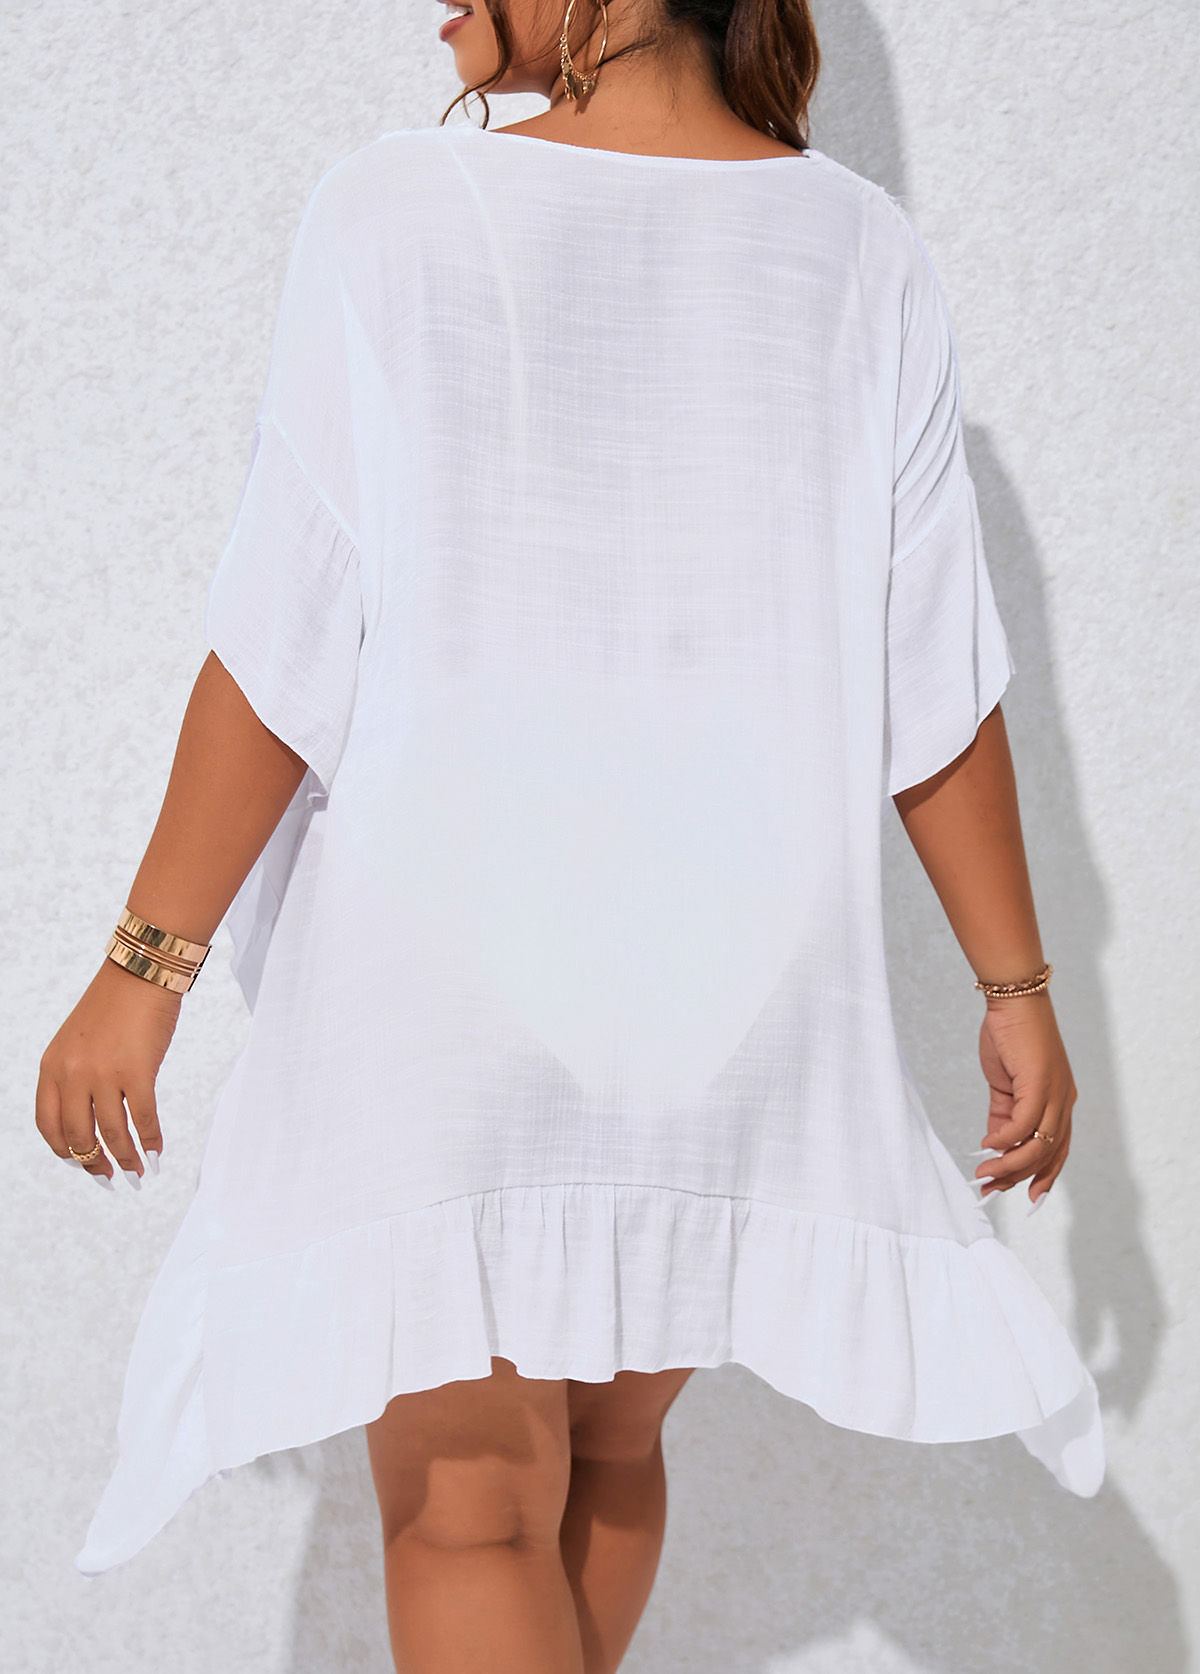 Plus Size Tassel Patchwork White Cover Up